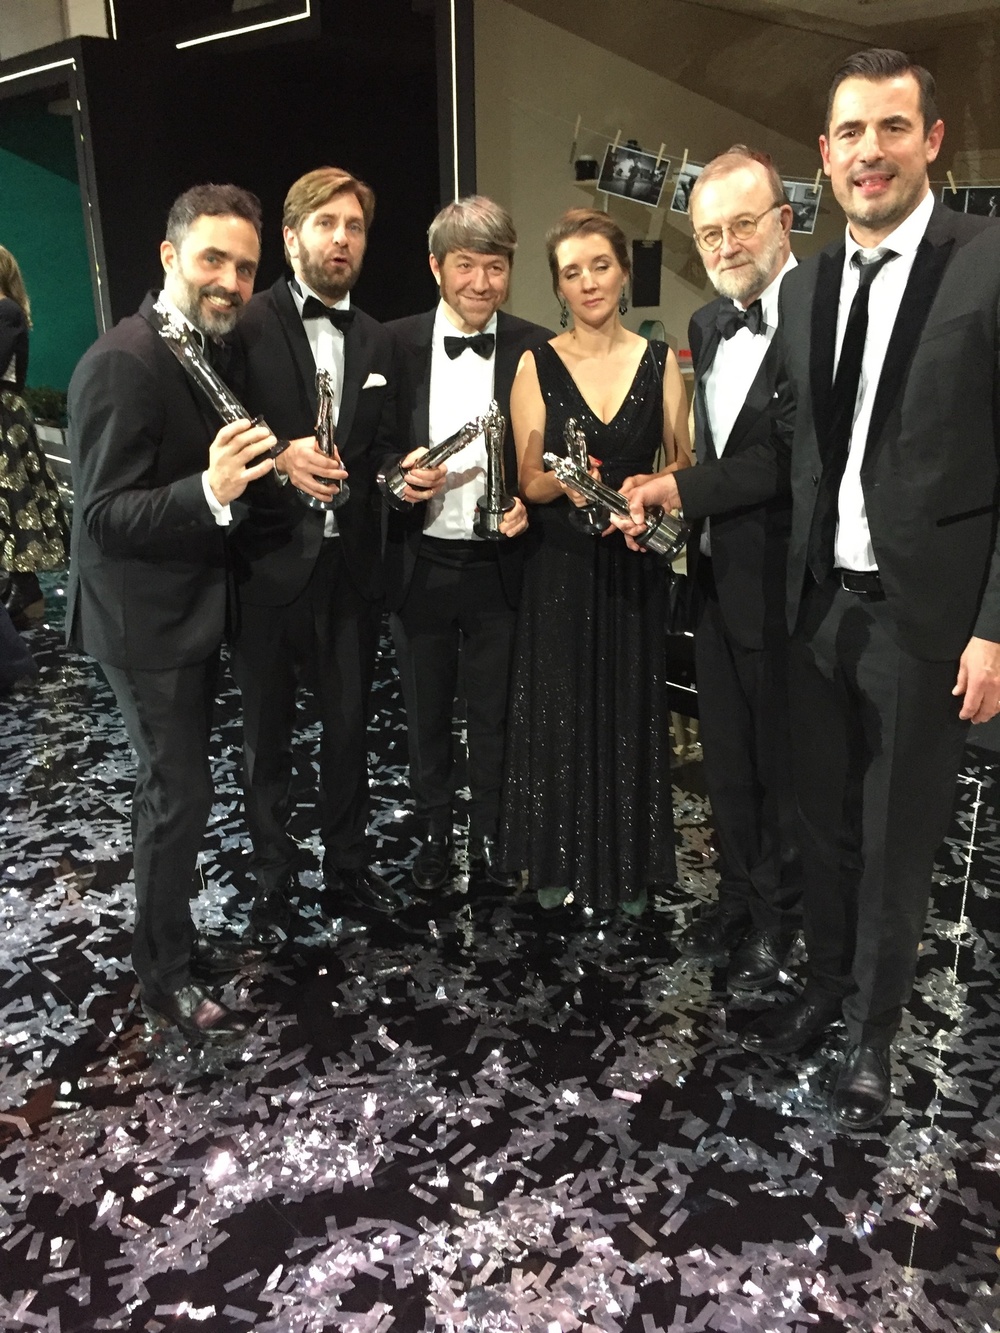 Five years ago, The Square won a full six statuettes at the European Film Award gala. Photo: Jan Göransson